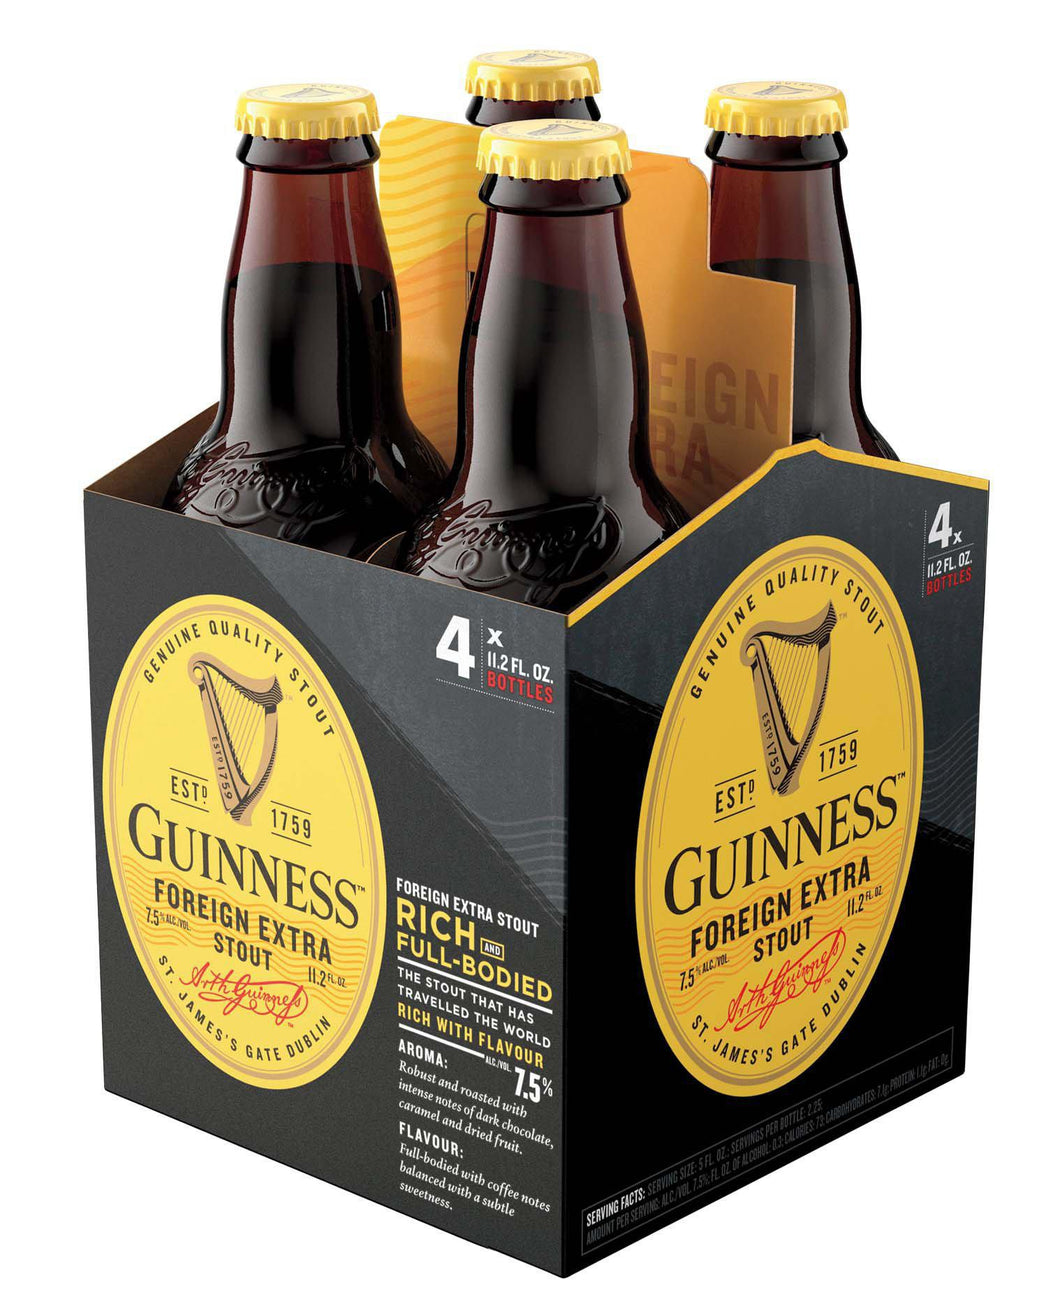 Guinness Foreign Extra Stout - 11.2 oz bottle